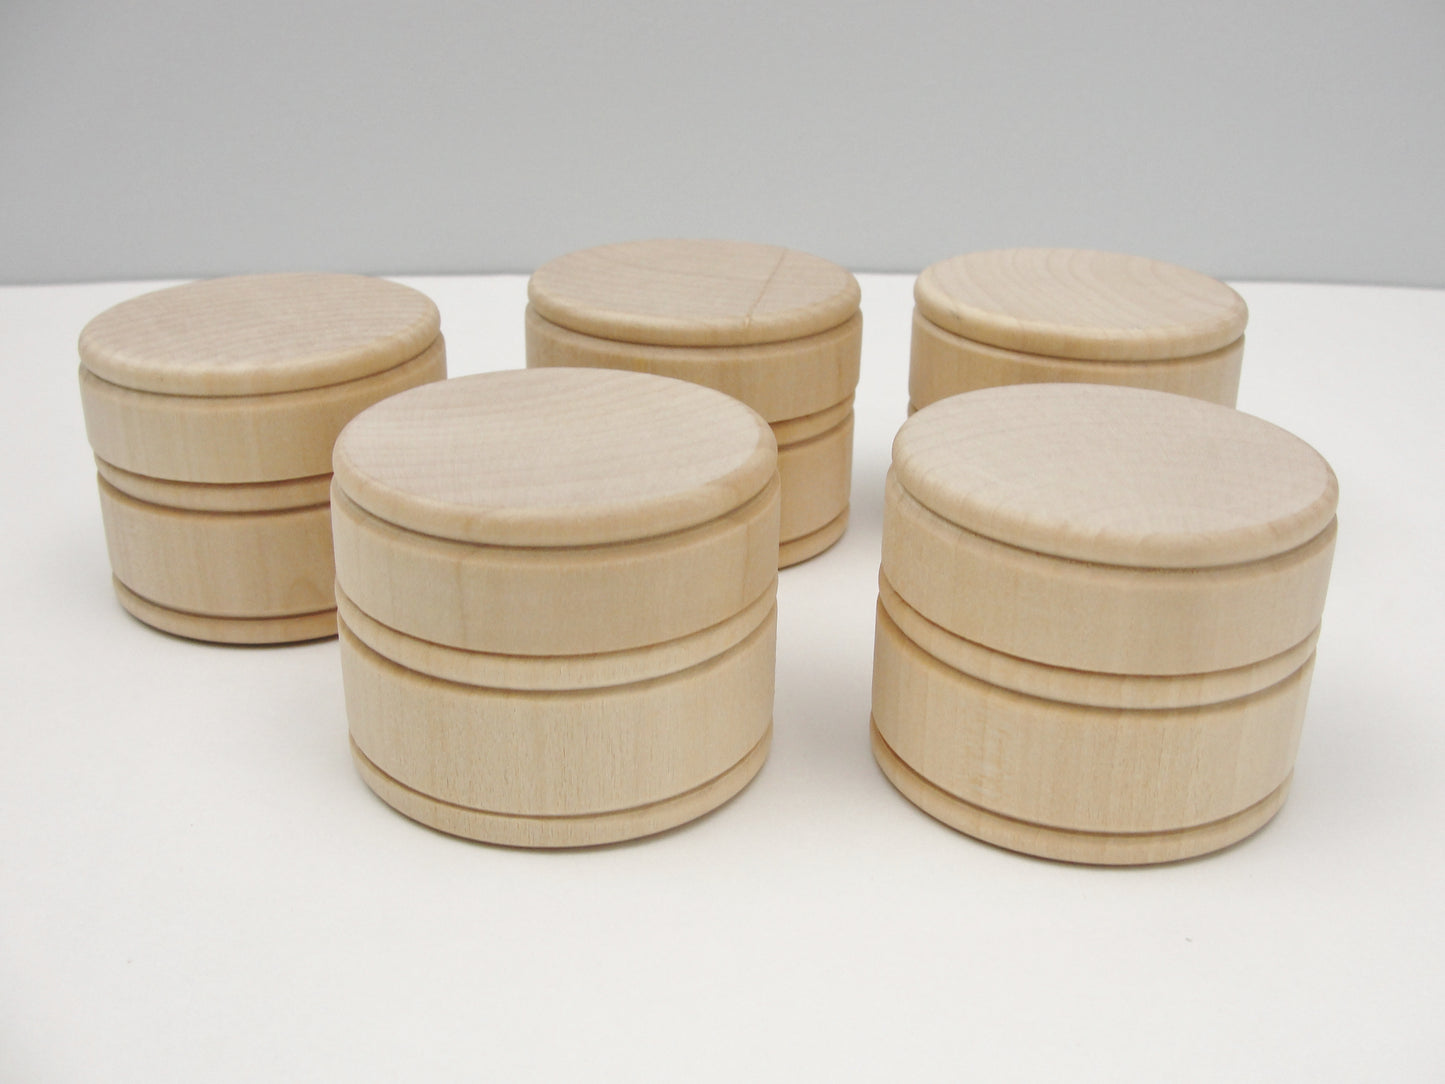 Wooden ring box or keepsake box, middle size of 3, set of 5 - Wood parts - Craft Supply House